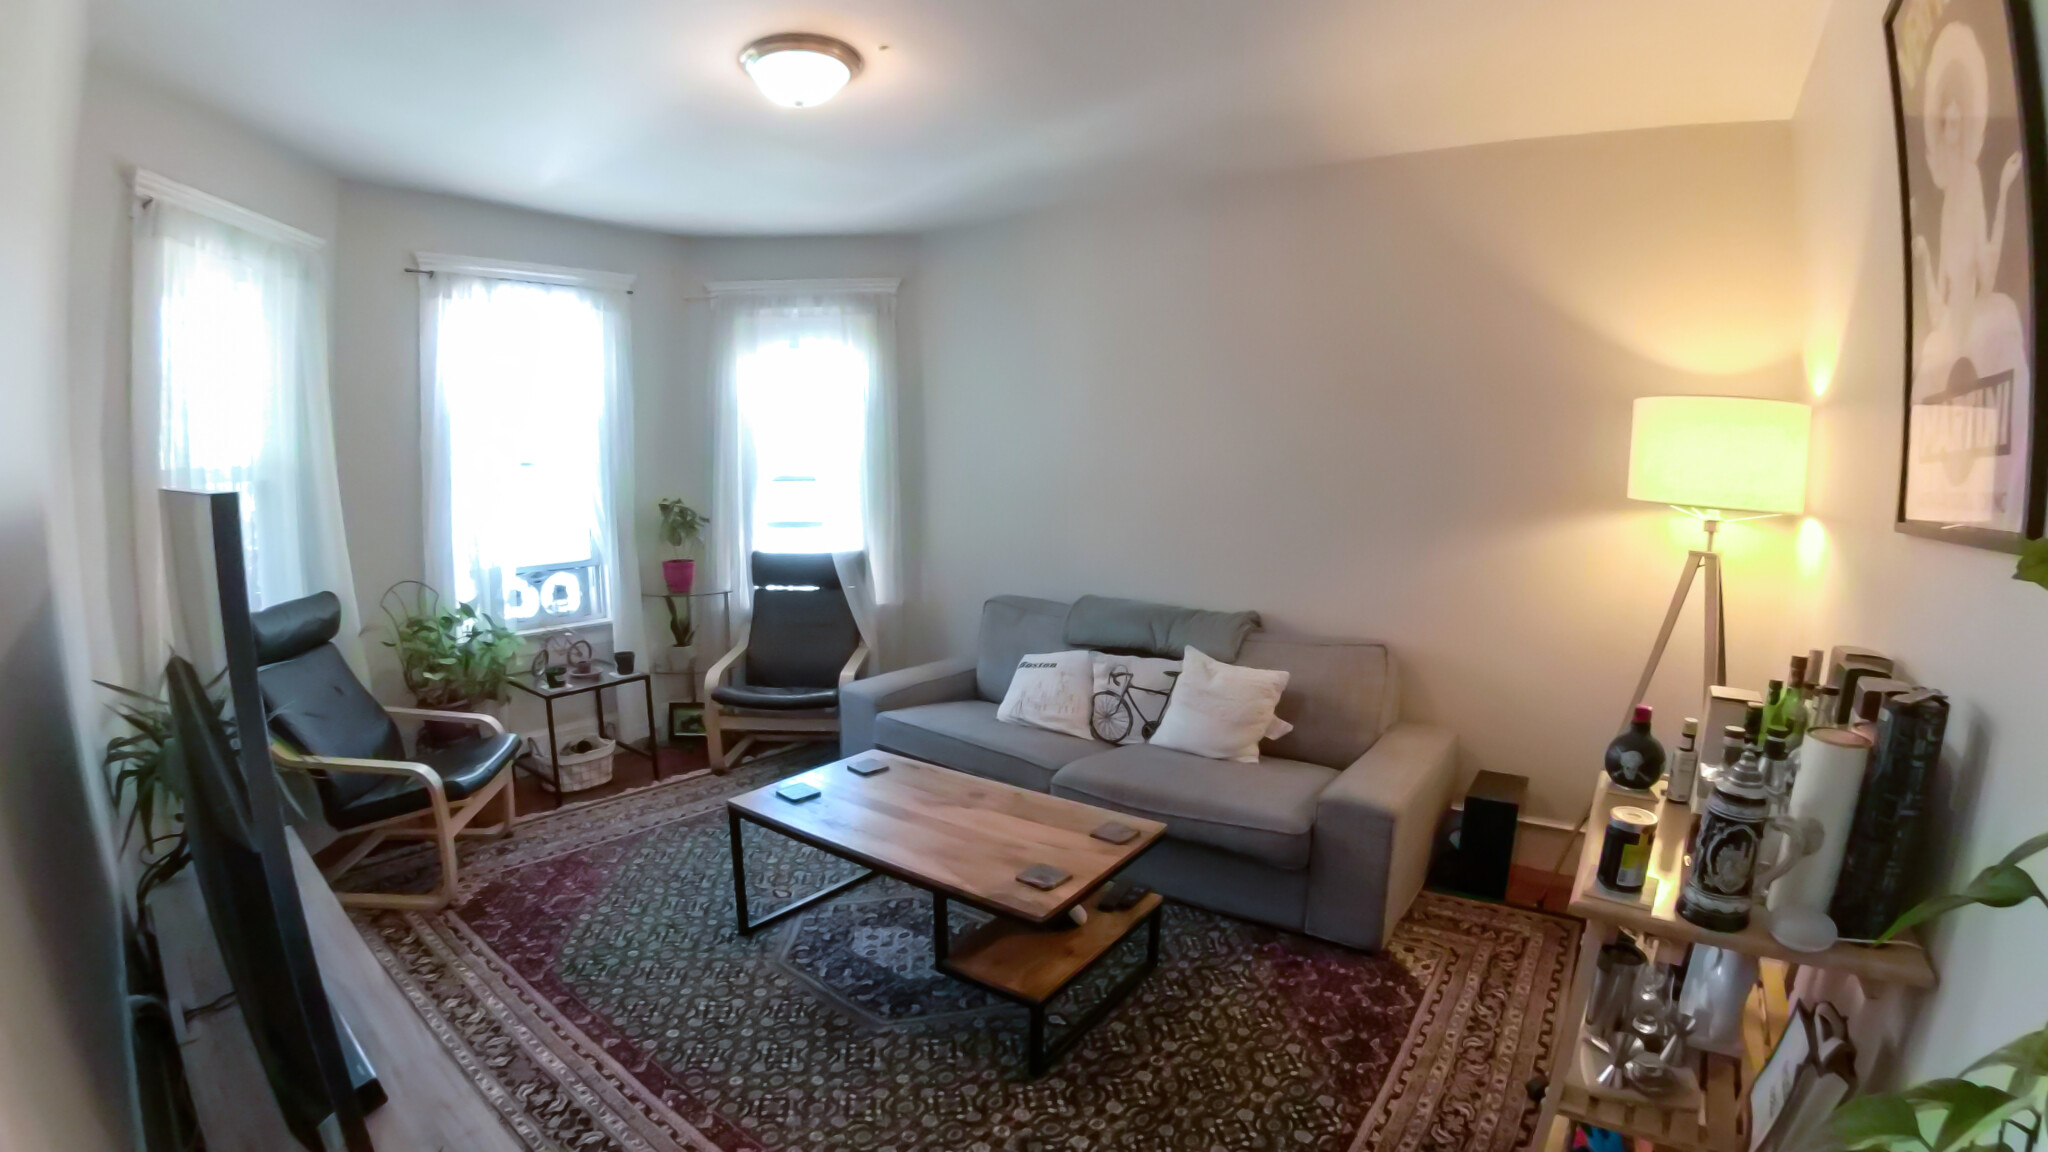 Photos of apartment on Hinckley St.,Somerville MA 02145